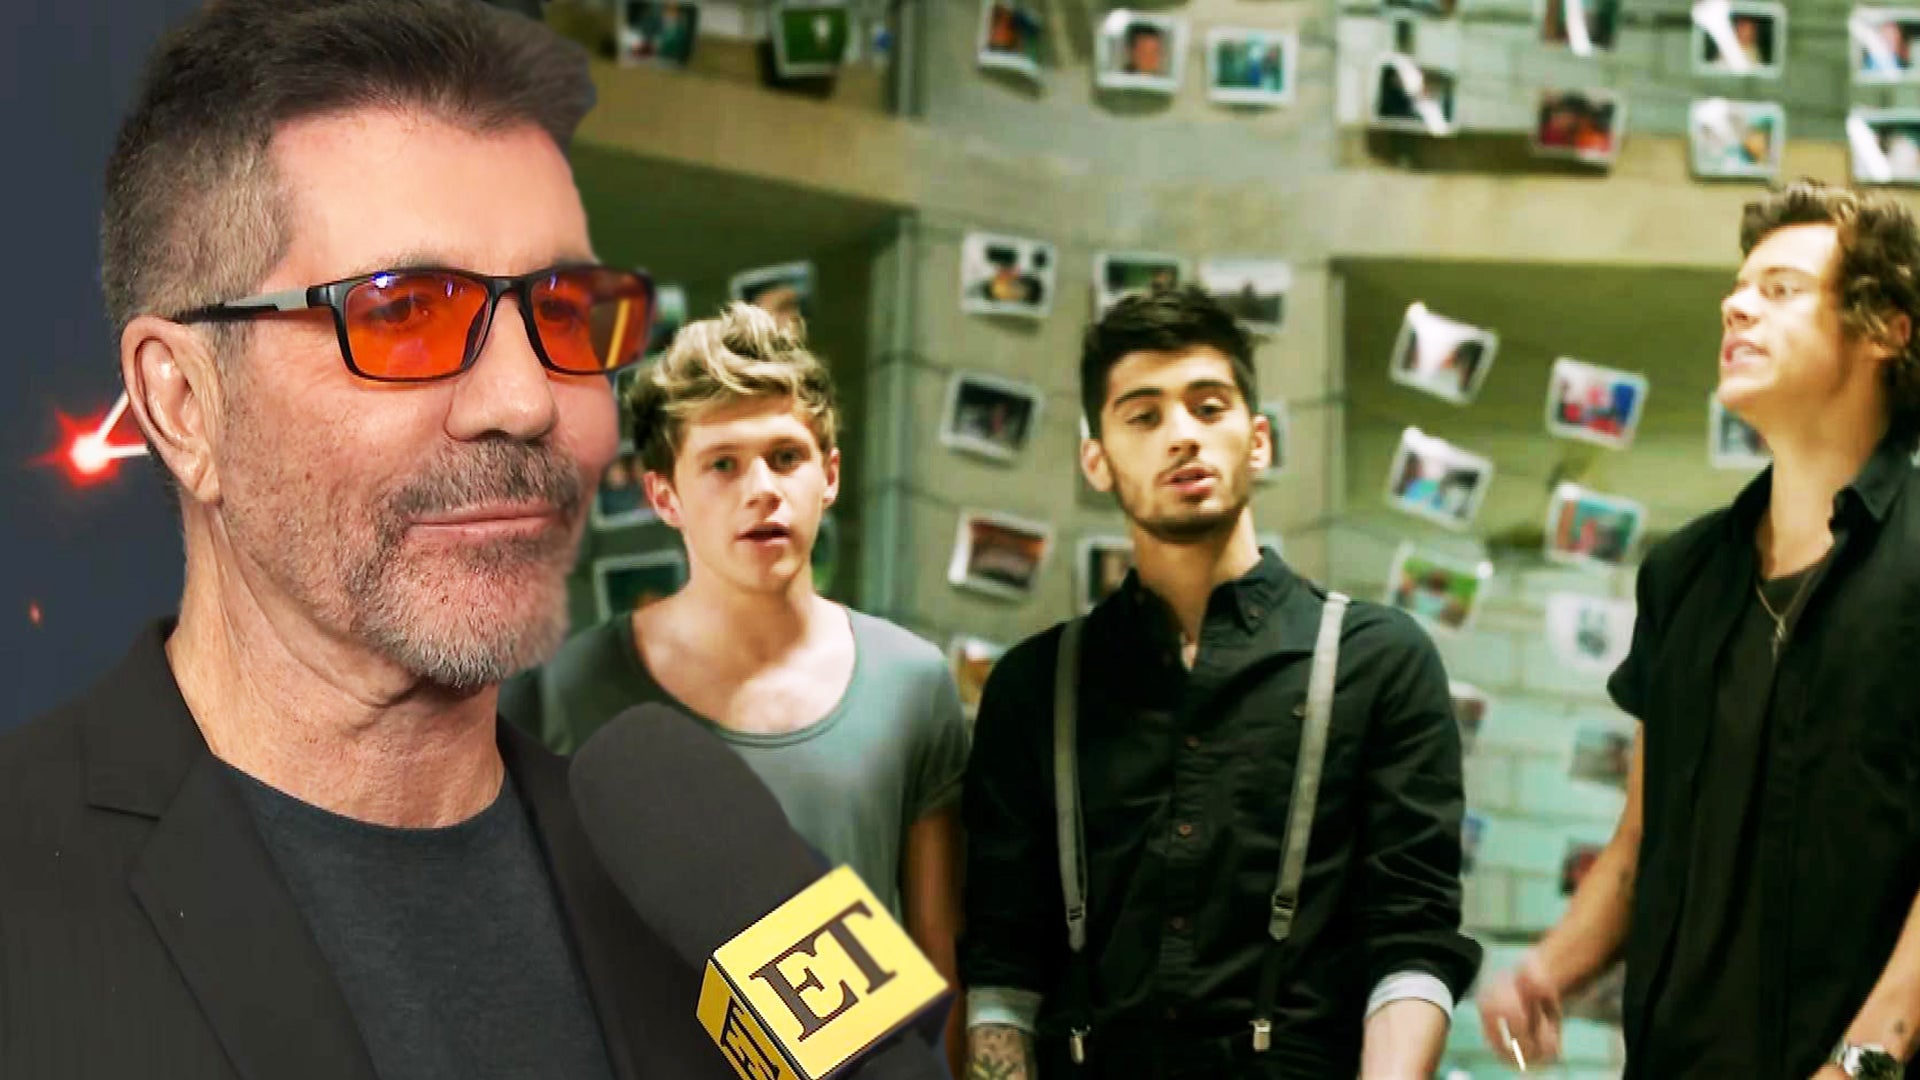 ‘AGT’: Simon Cowell Weighs In on a Potential One Direction Runion